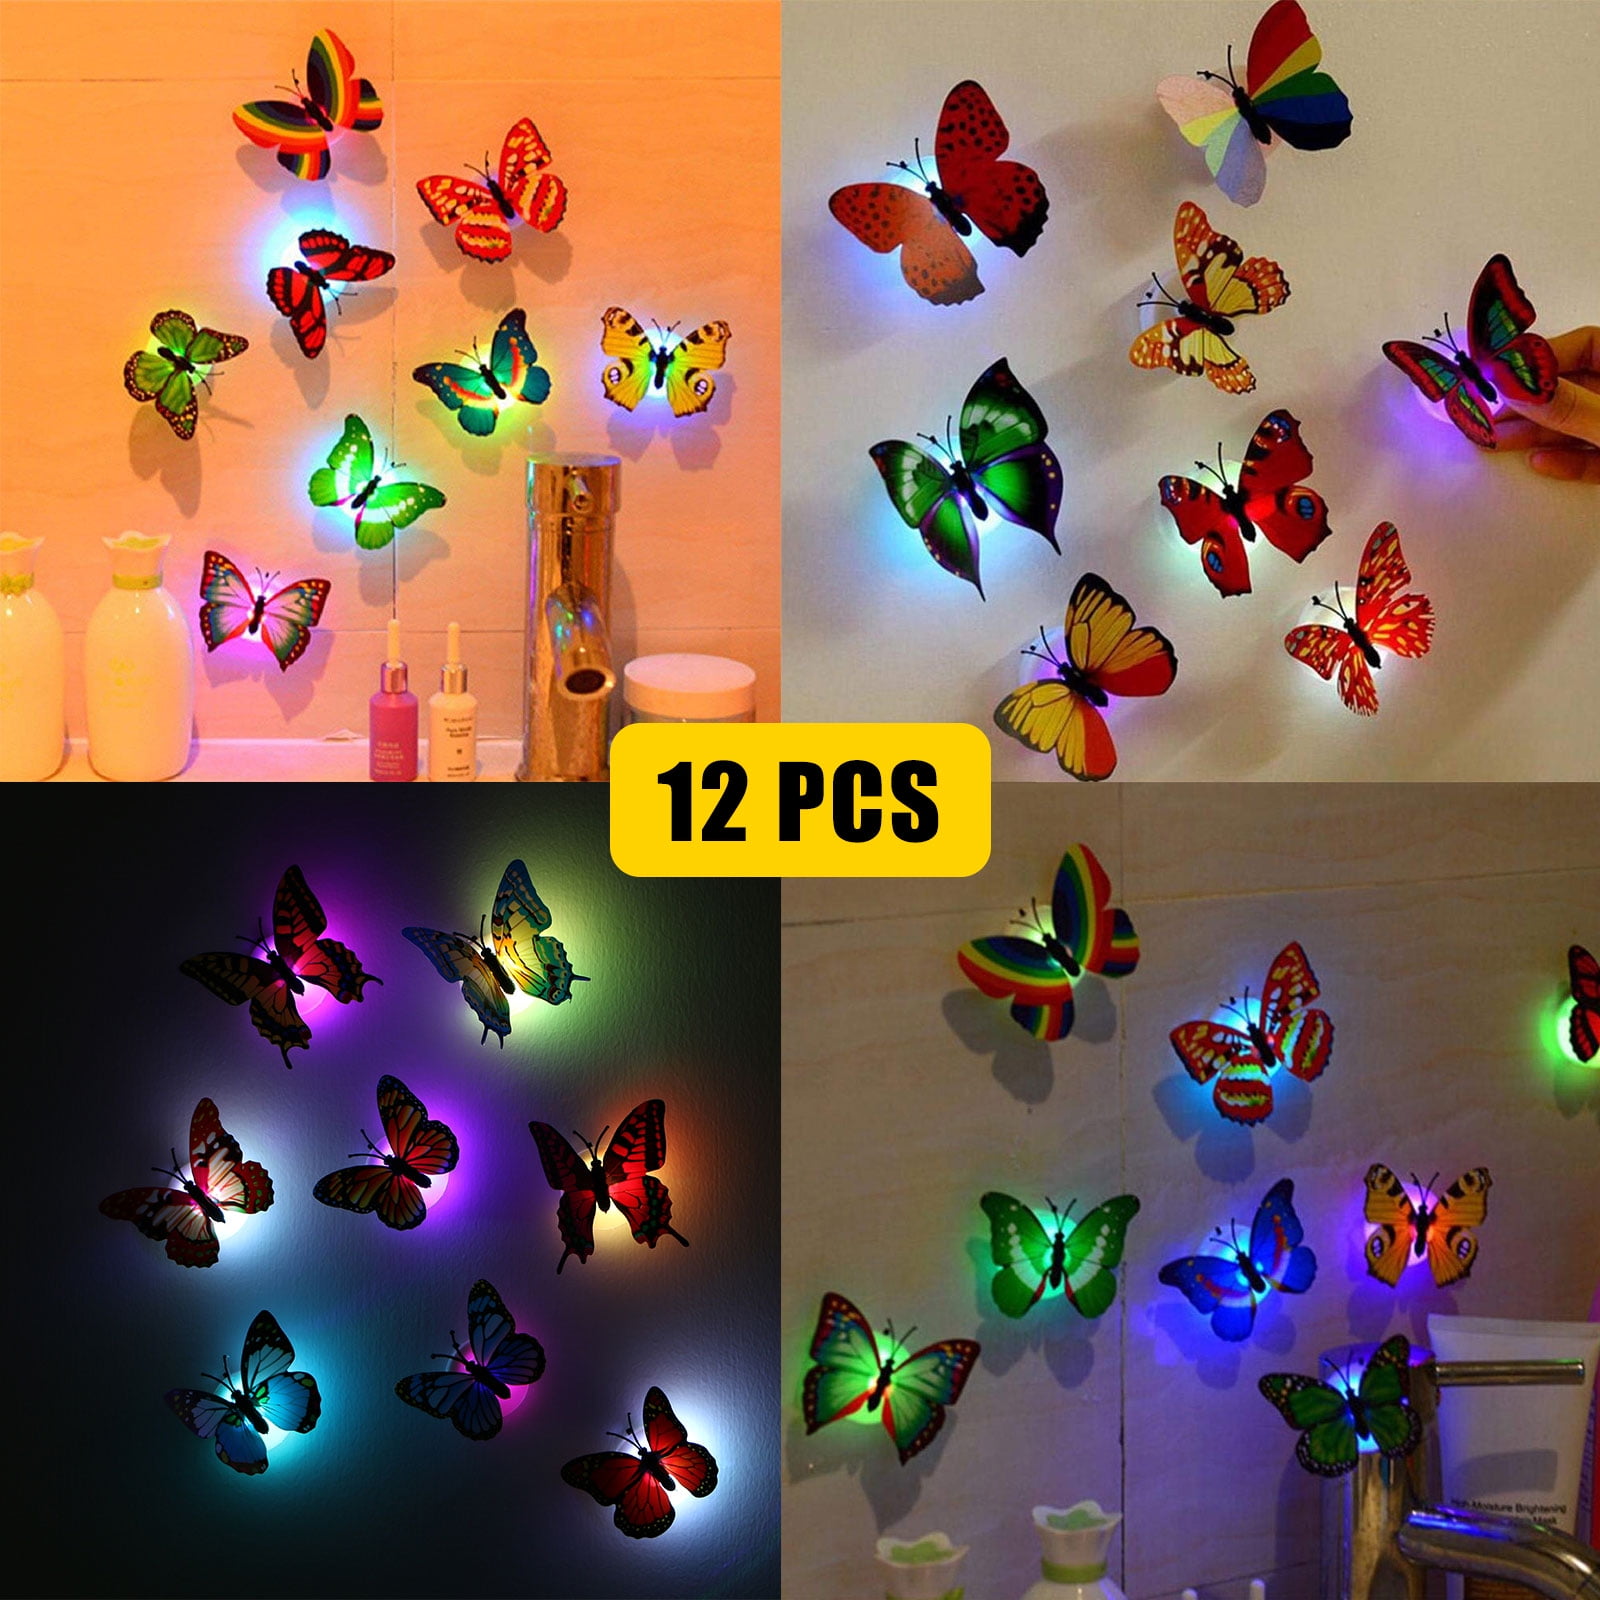 Pack of Kids Bedroom Decor Removable 3D Stickers Wall//Windows Lots of Designs